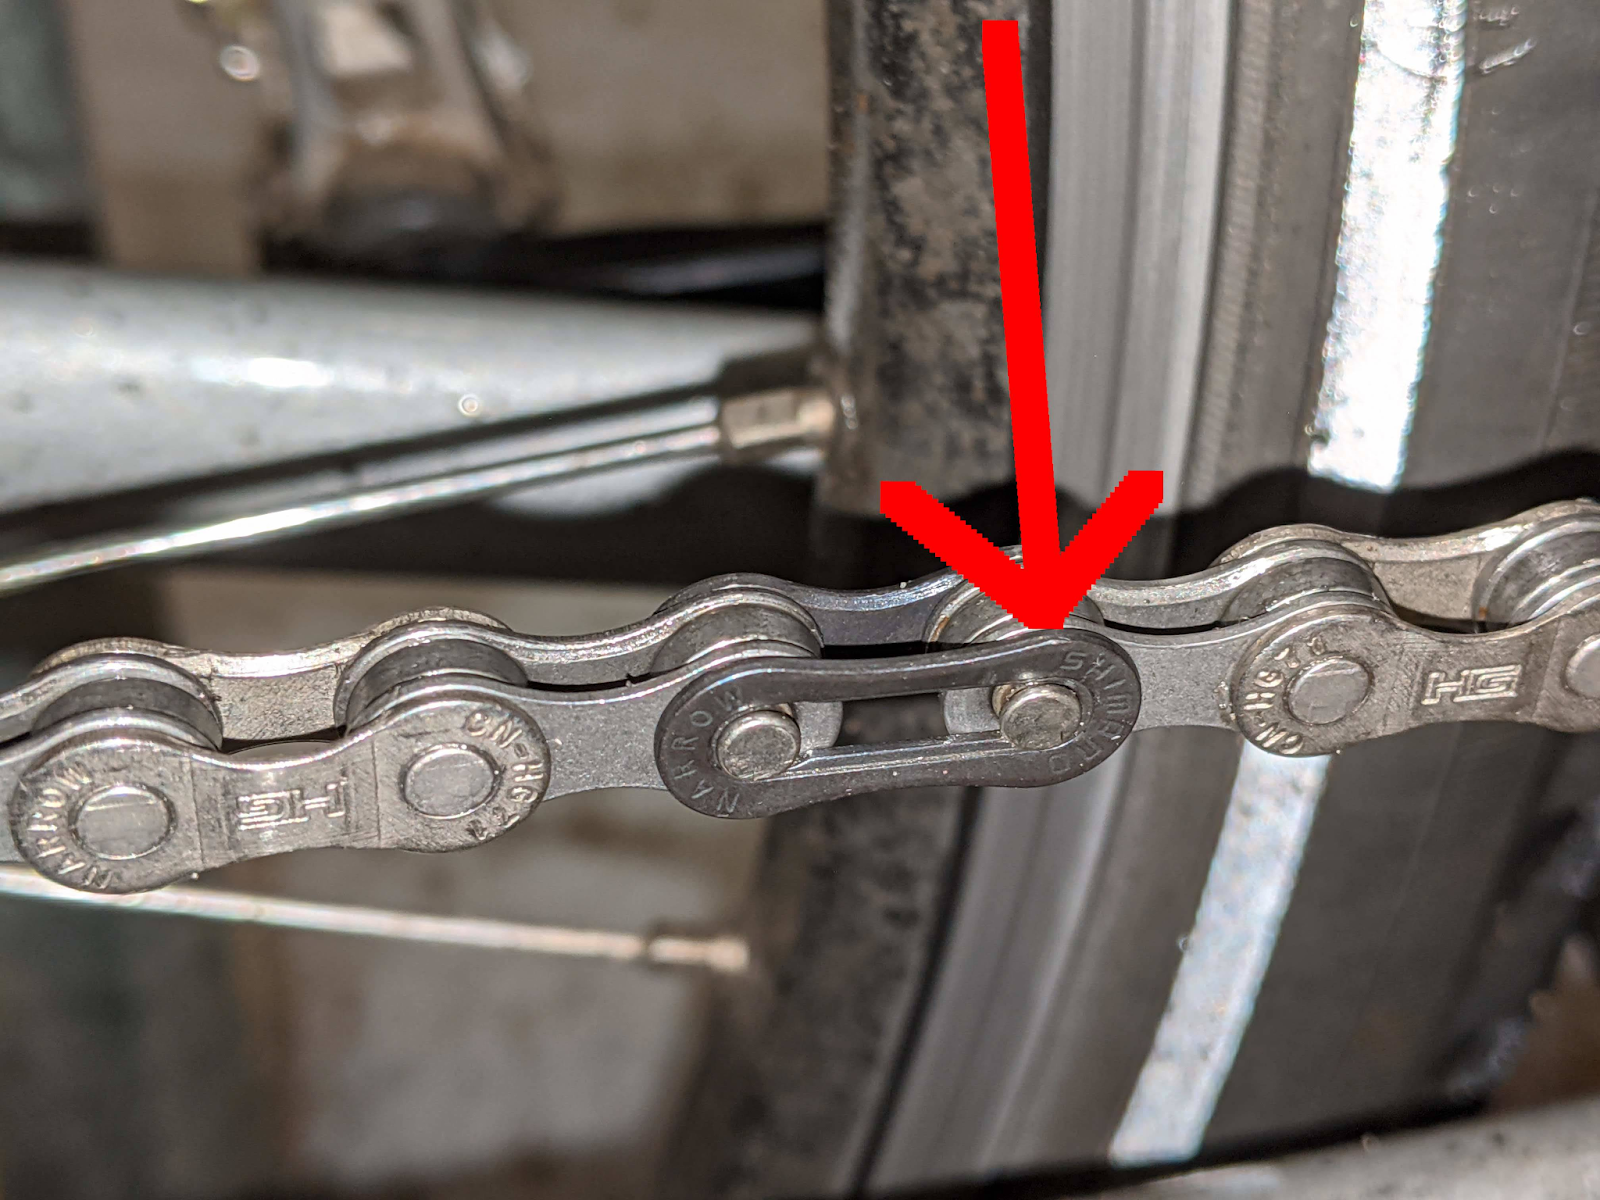 Using a master link is the easiest way to connect a newly sized mountain bike chain.